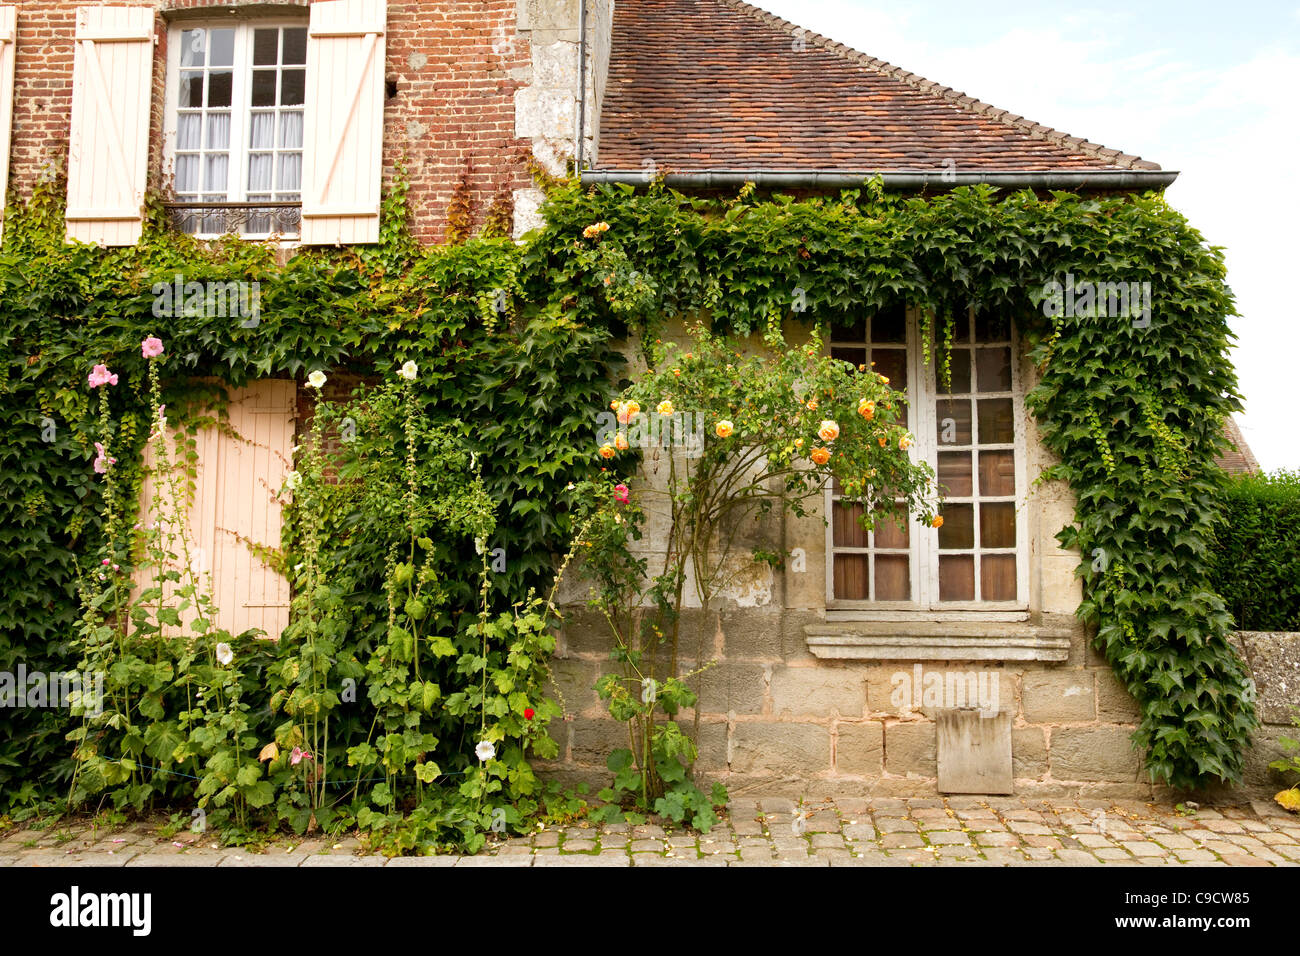 The village of Gerberoy Picardy France Stock Photo